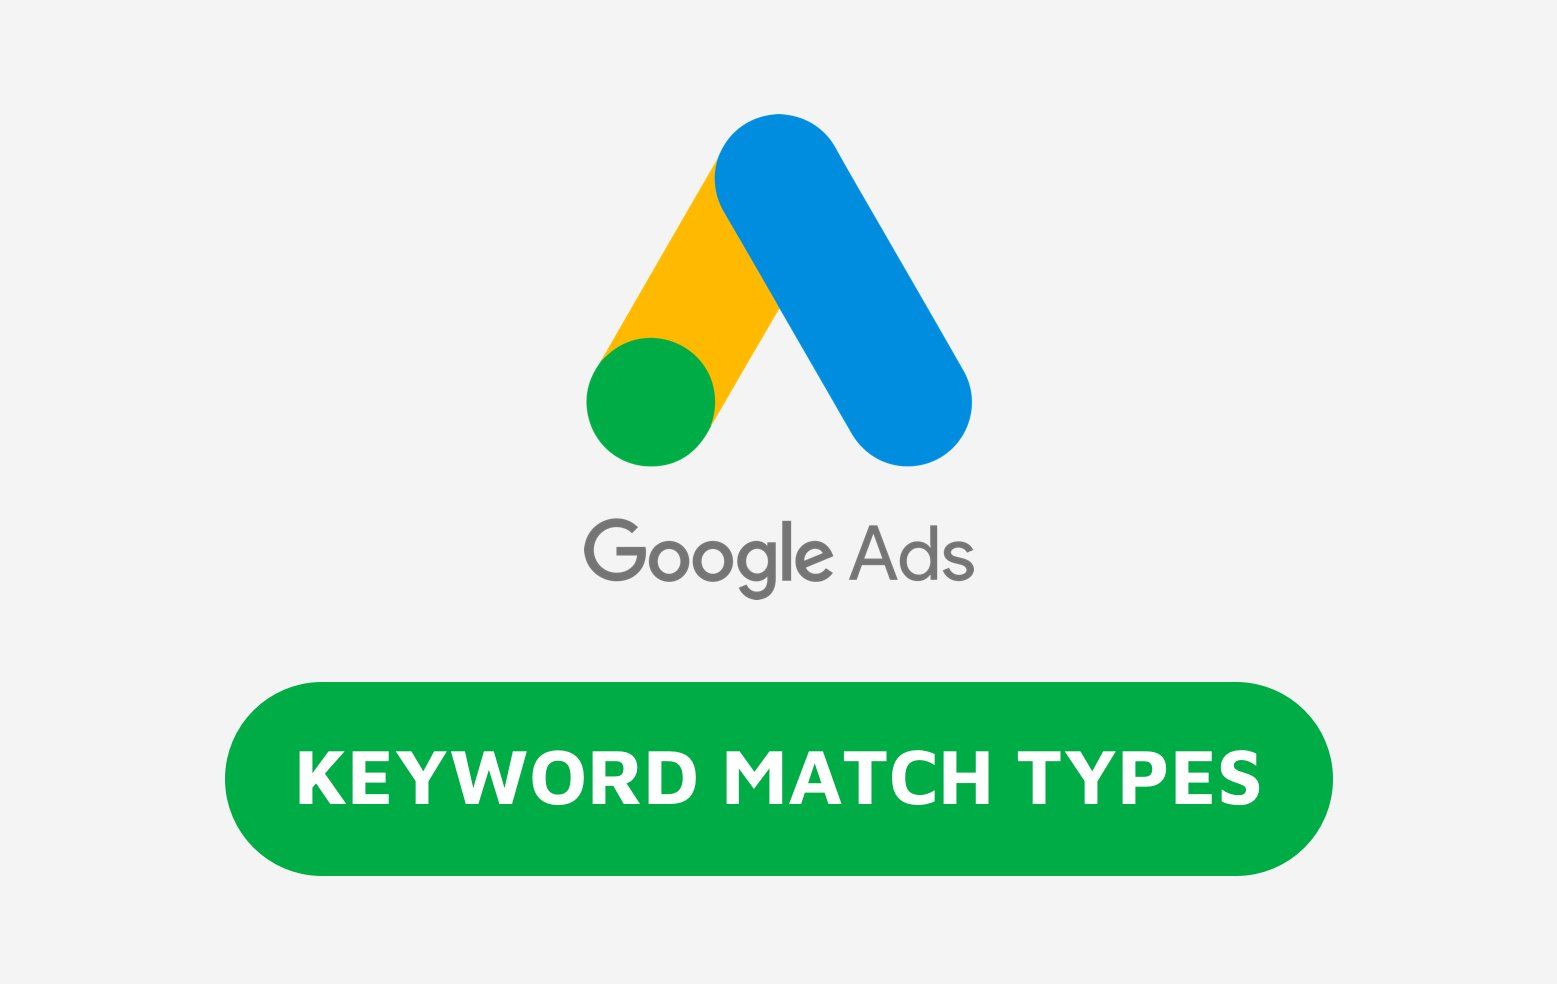 What are the three Keyword Match Types in Google Ads?